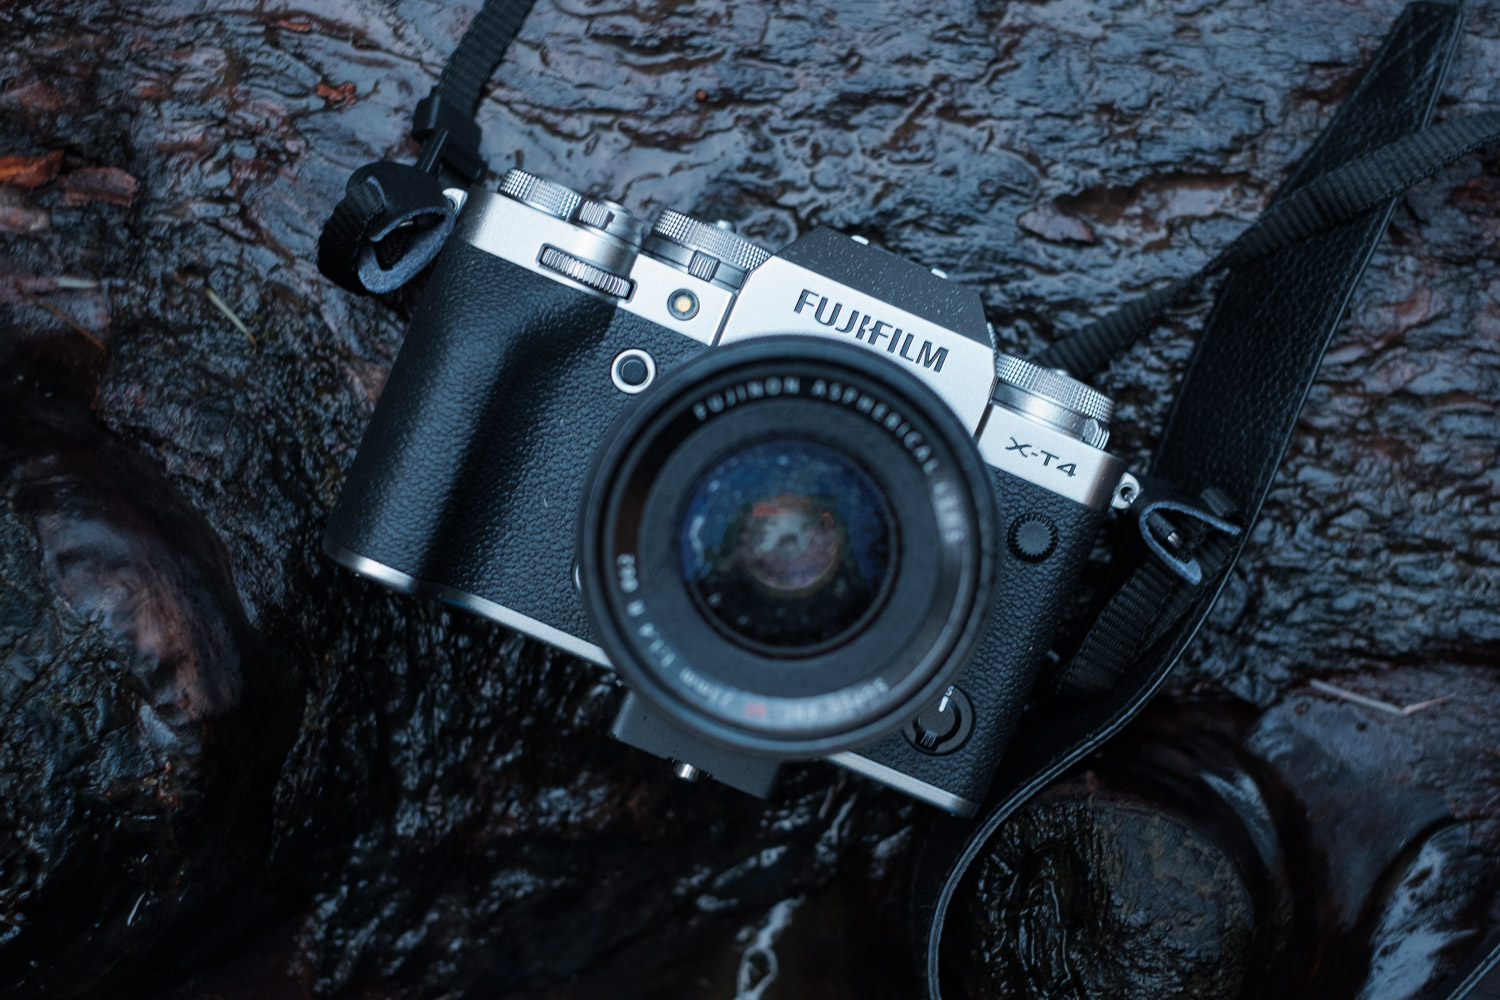 FUJIFILM X-T4 Hands-on Review - The Good Has Just Become Much Better